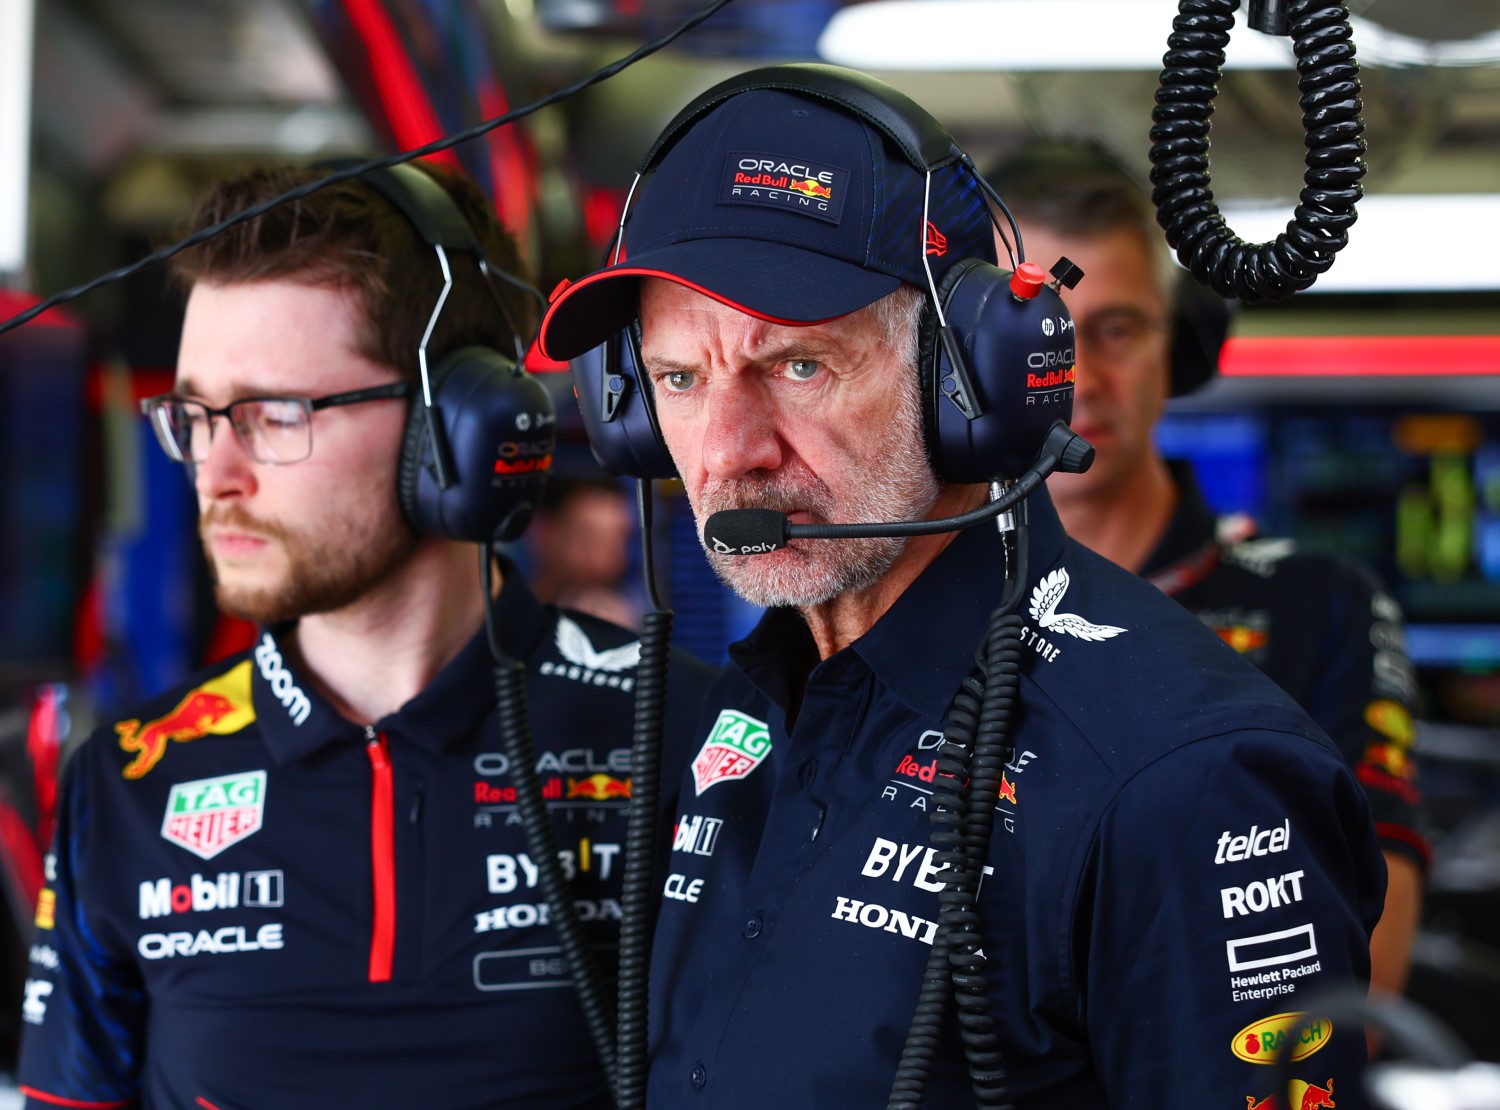 Adrian Newey, the Chief Technical Officer of Red Bull Racing looks on in the garage during day one of F1 Testing at Bahrain International Circuit on February 23, 2023 in Bahrain, Bahrain. (Photo by Mark Thompson/Getty Images) // Getty Images / Red Bull Content Pool